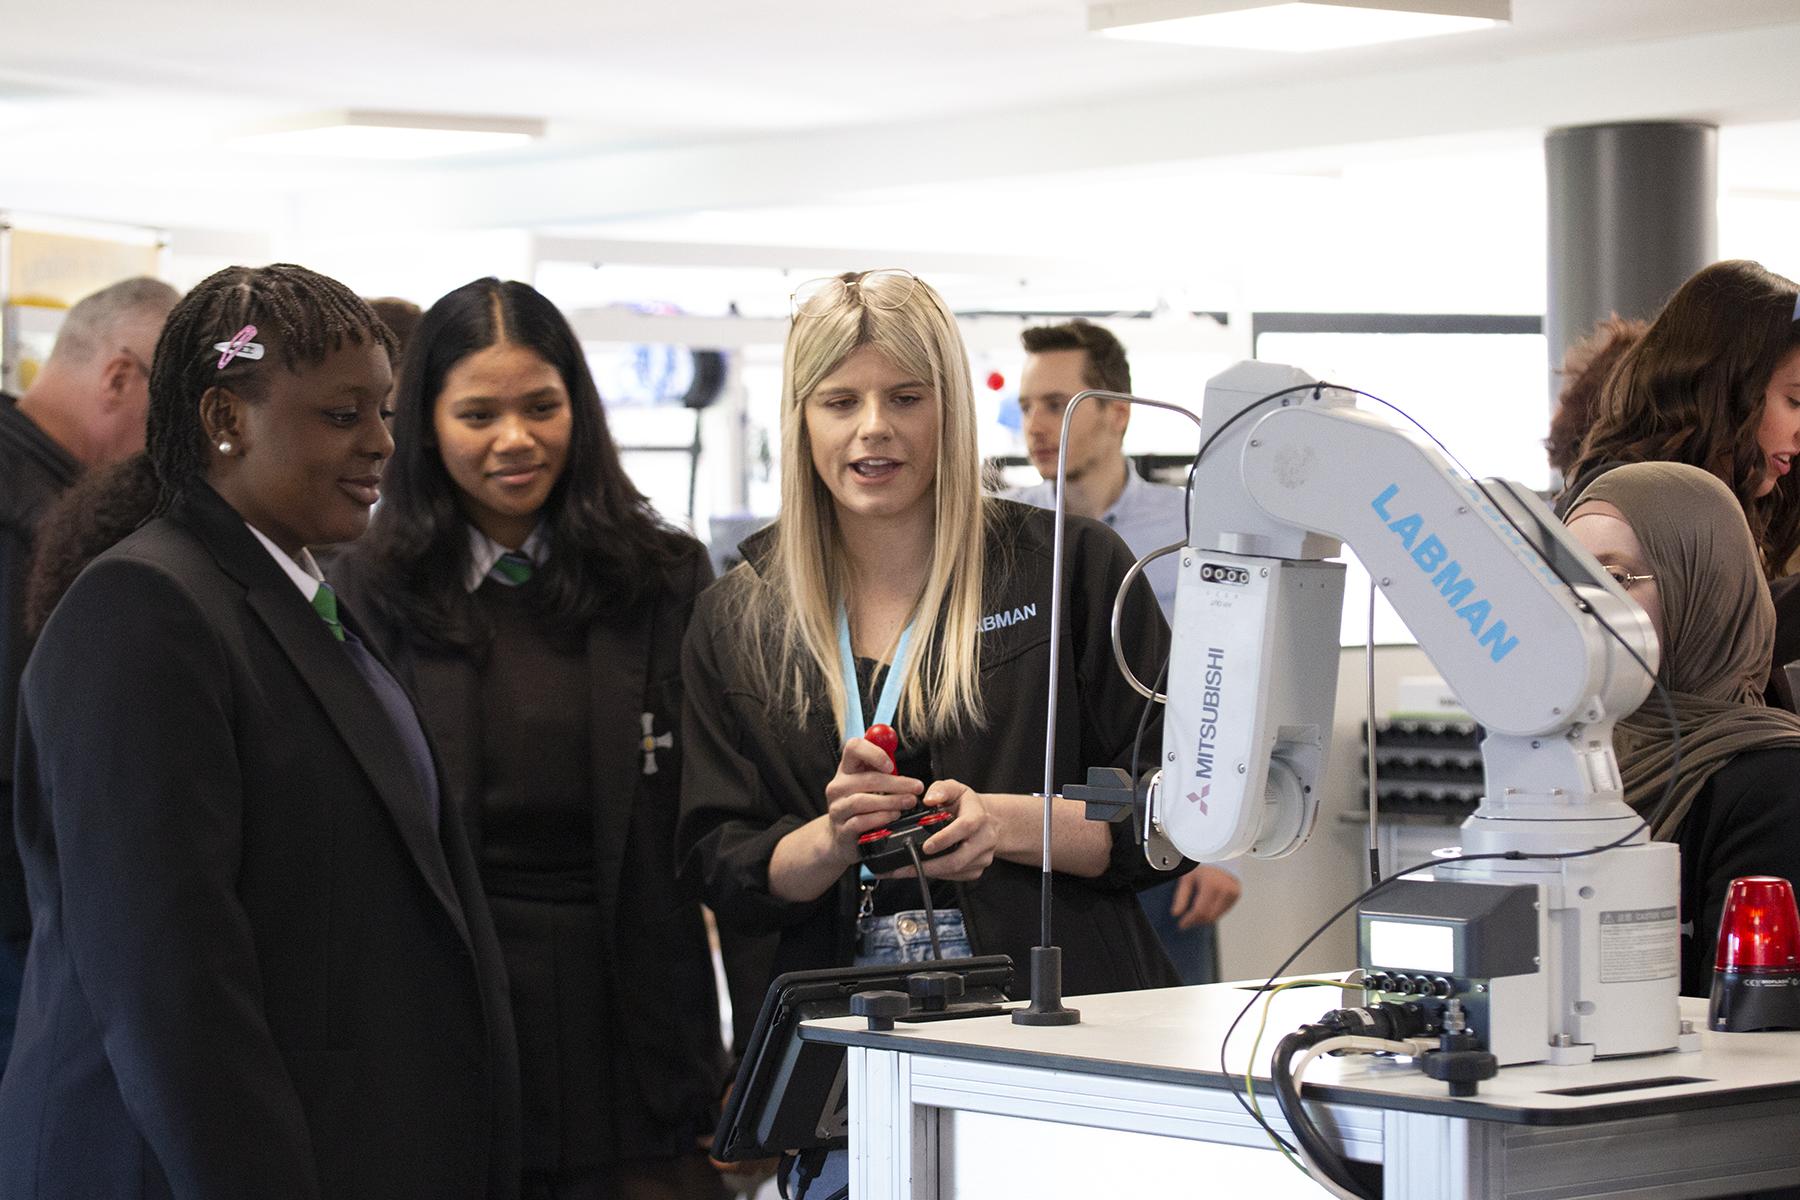 Female school students stand with Labman team member discovering a robot arm